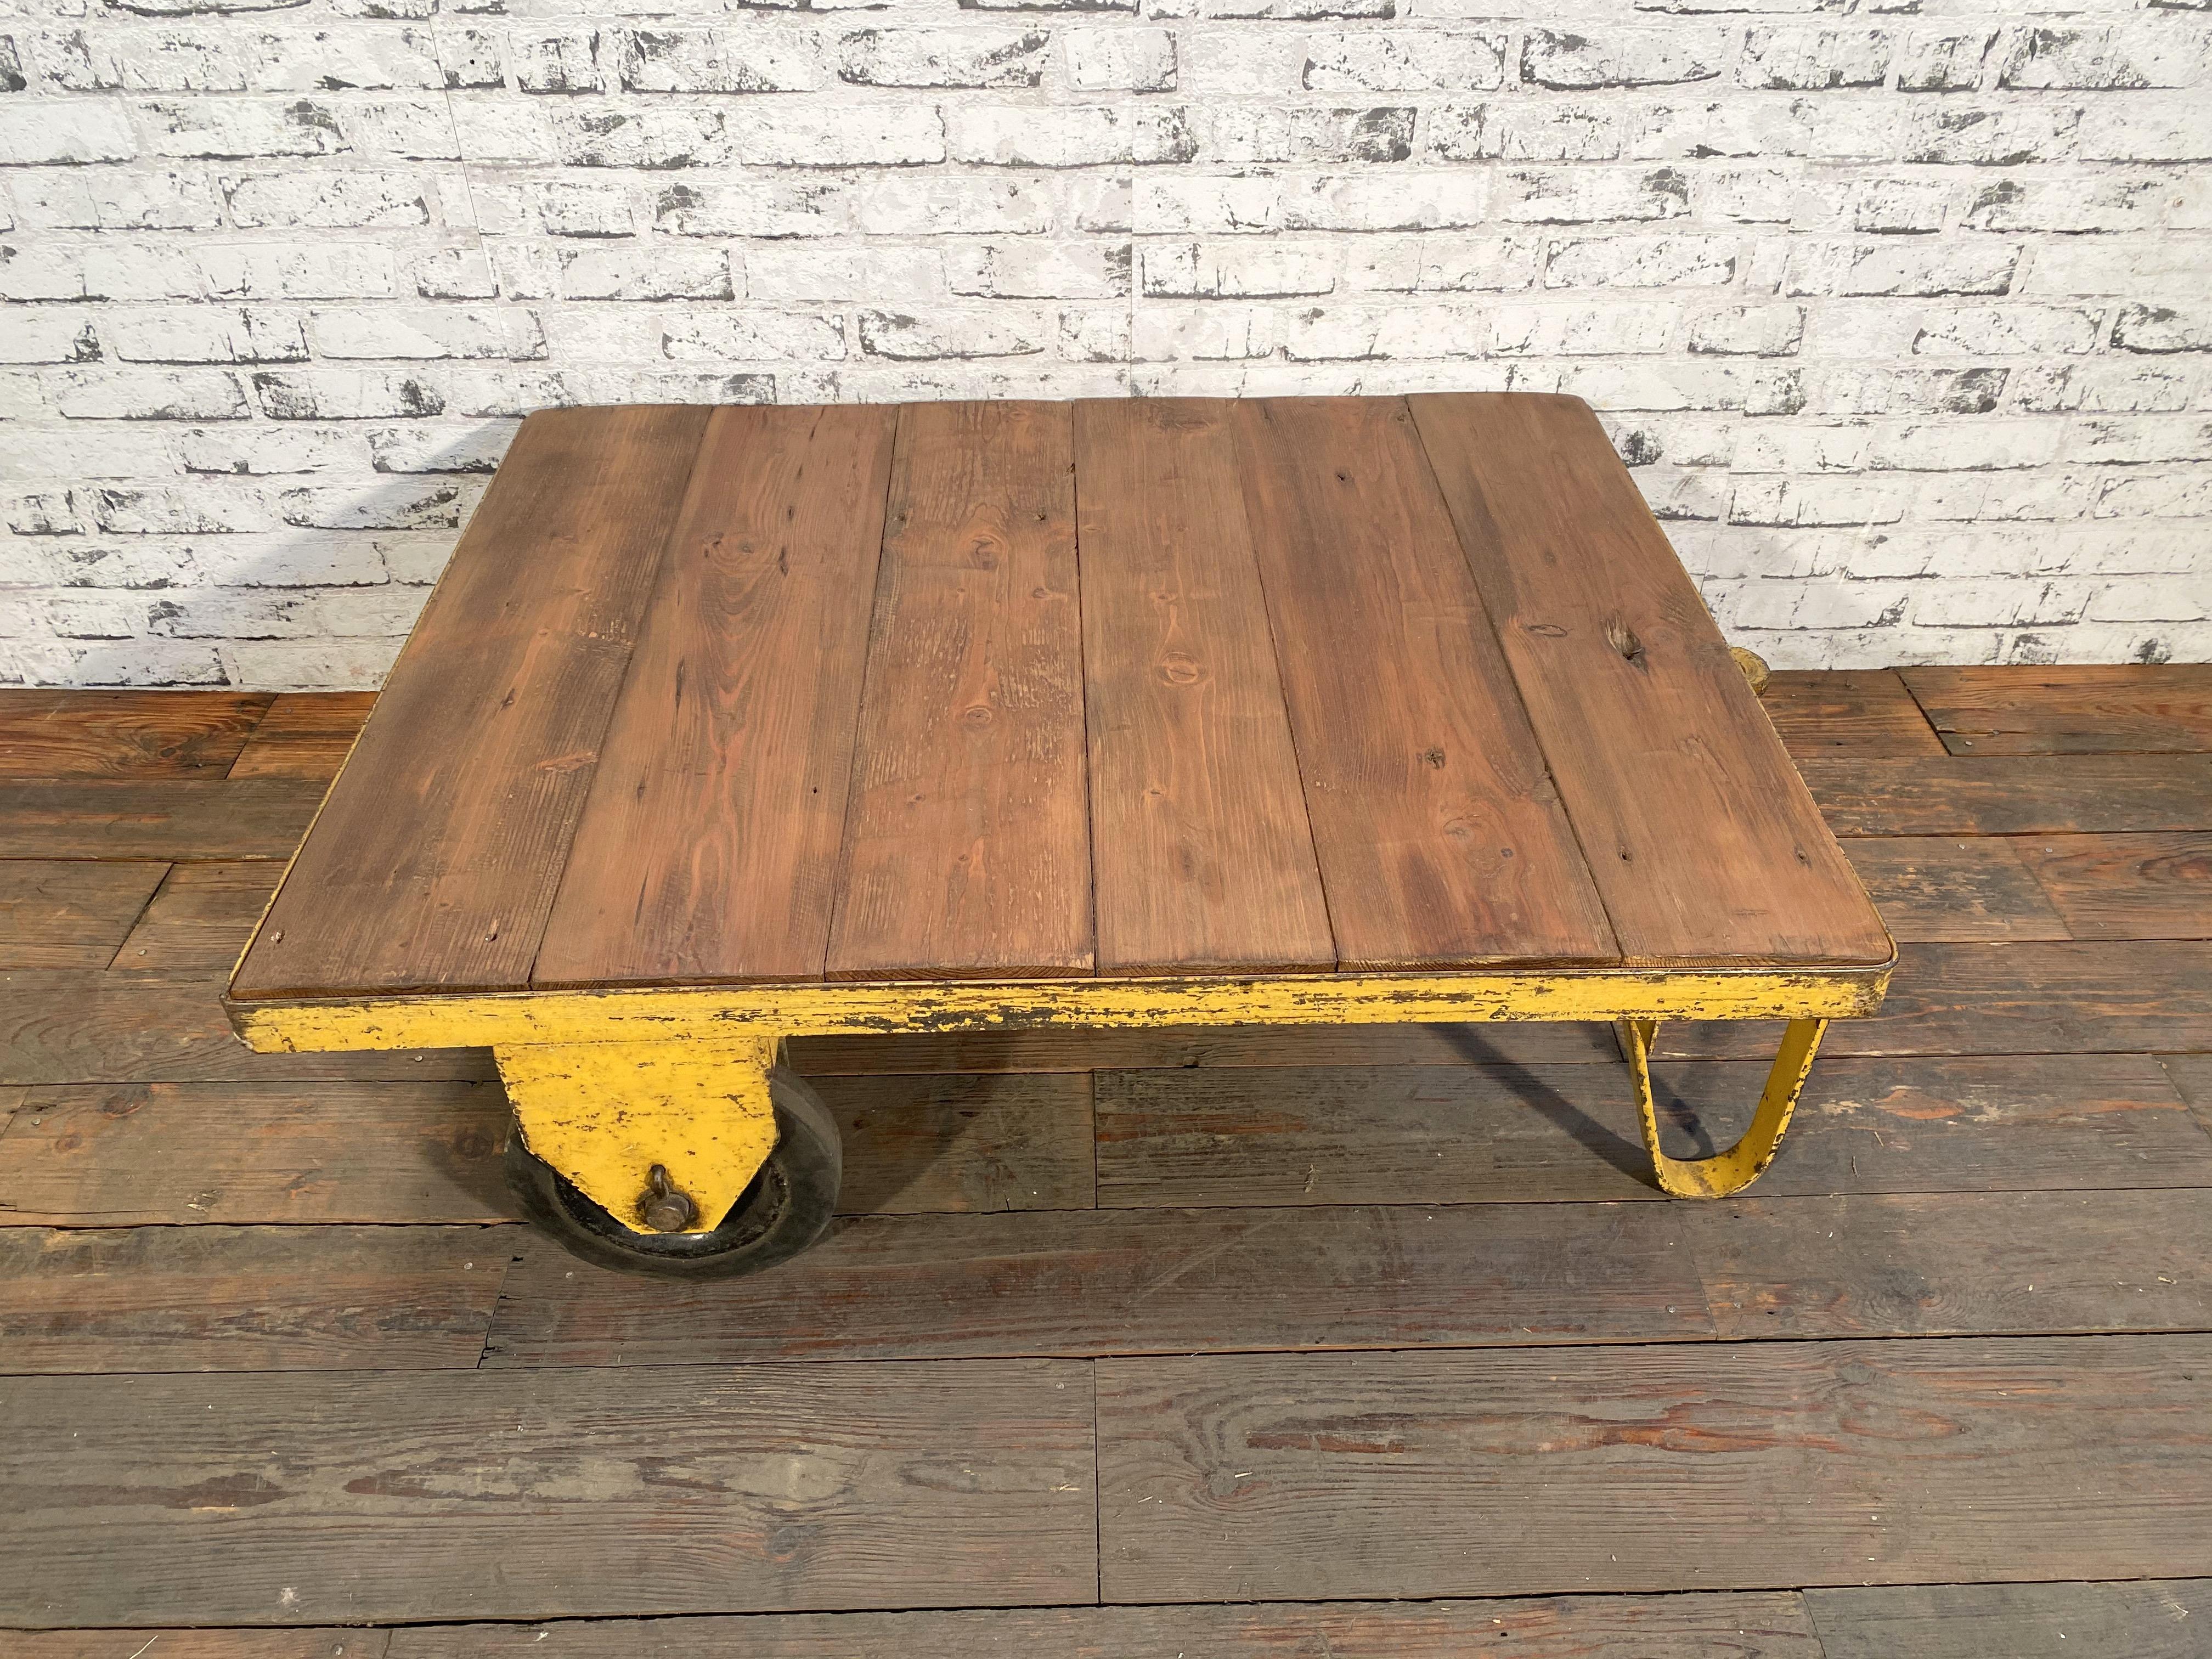 Former pallet truck from a factory now serves as a coffee table. It features a yellow iron construction with two wheels and a solid wooden plate. The weight of the table is 30 kg.